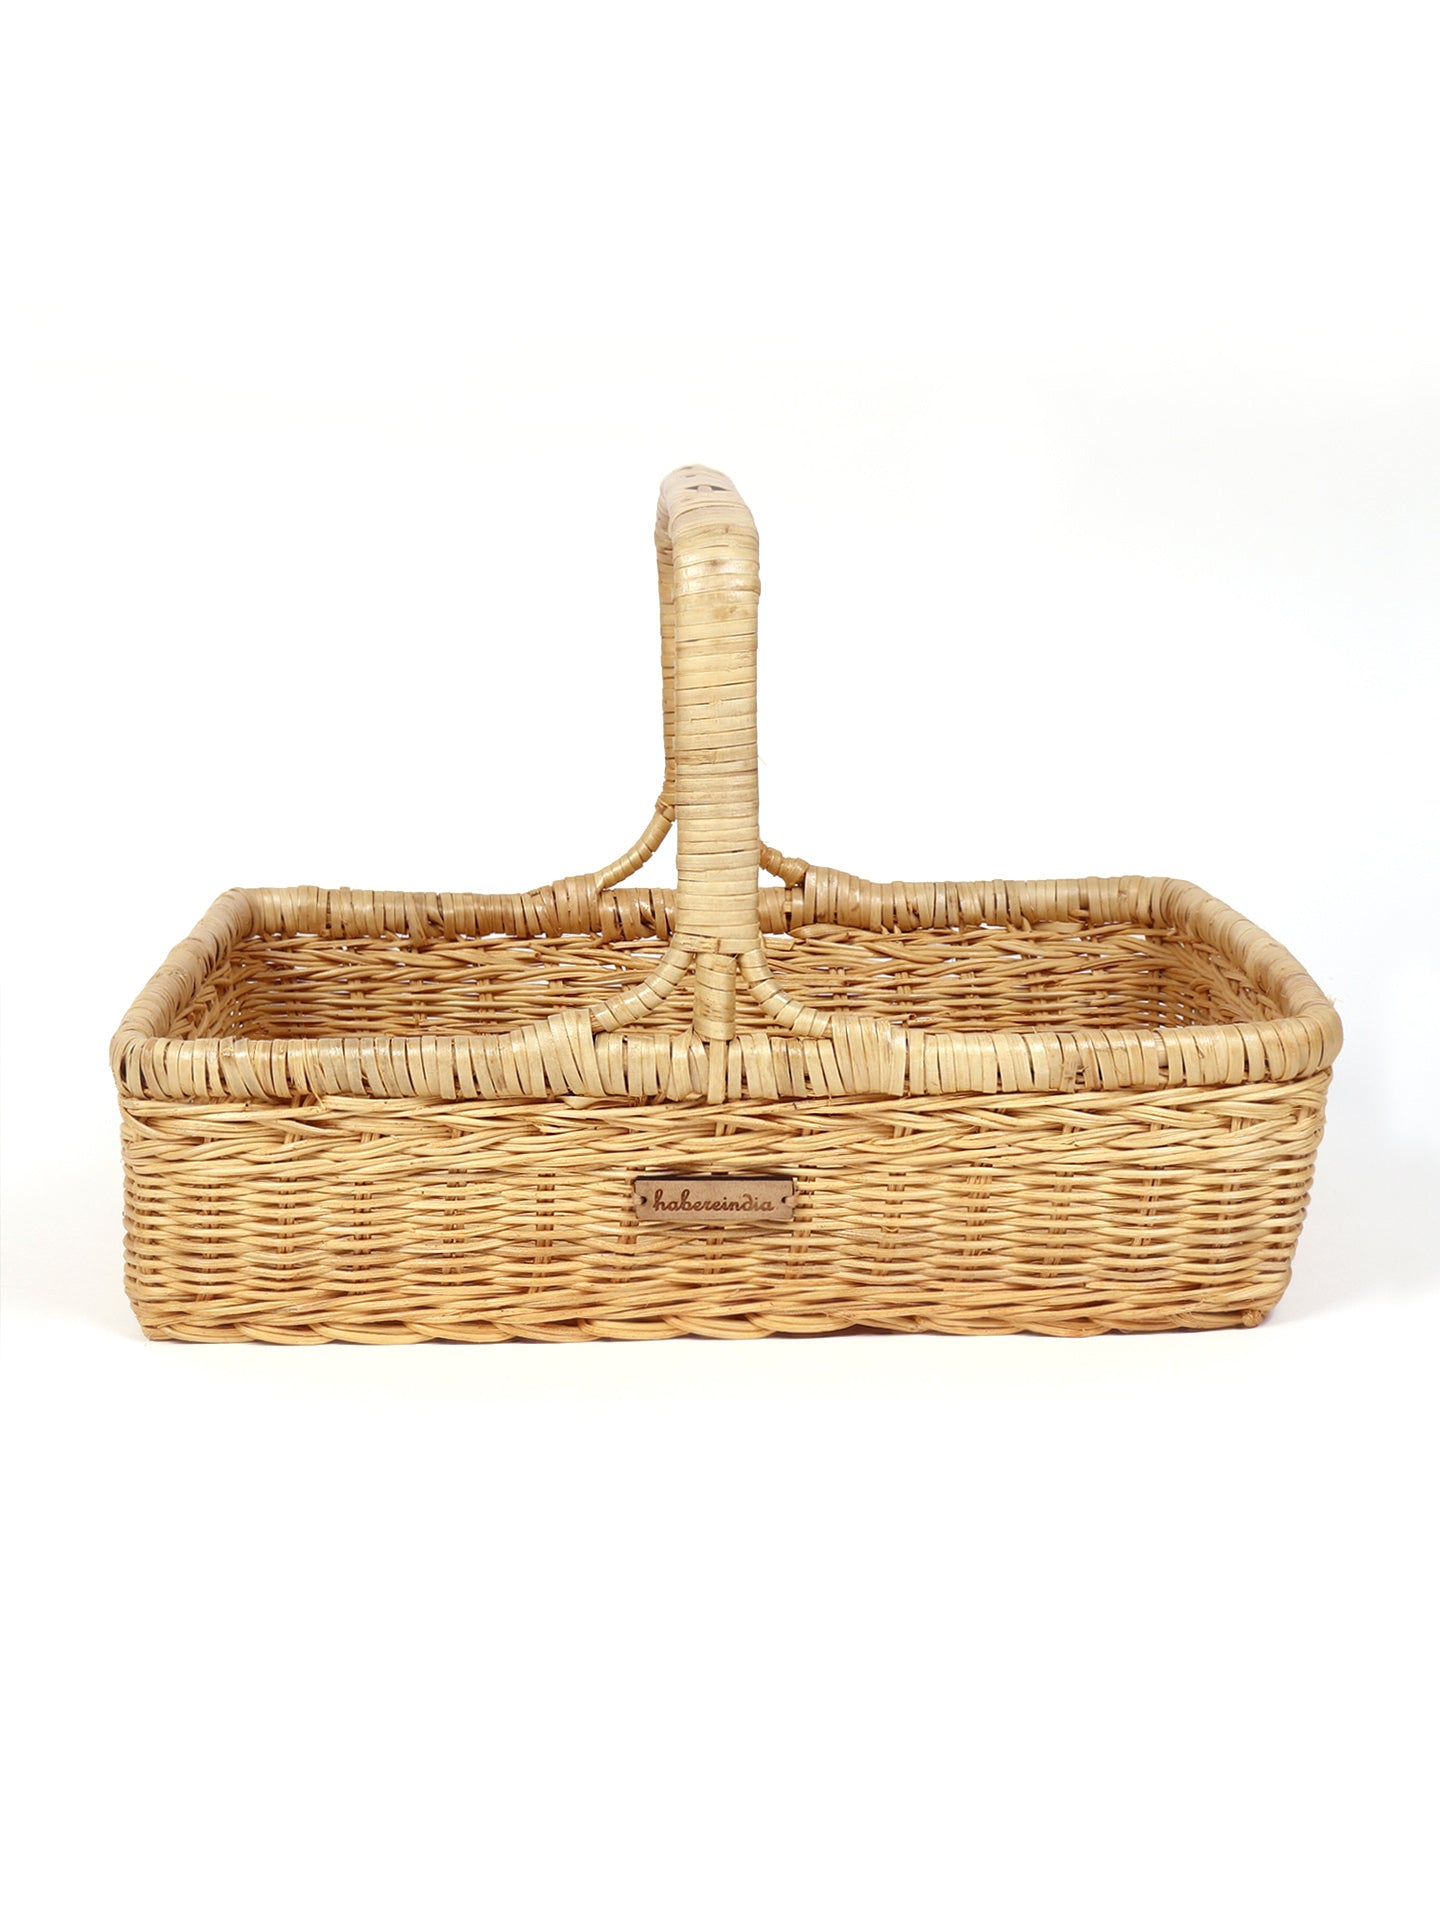 Bamboo Cane Baskets Online